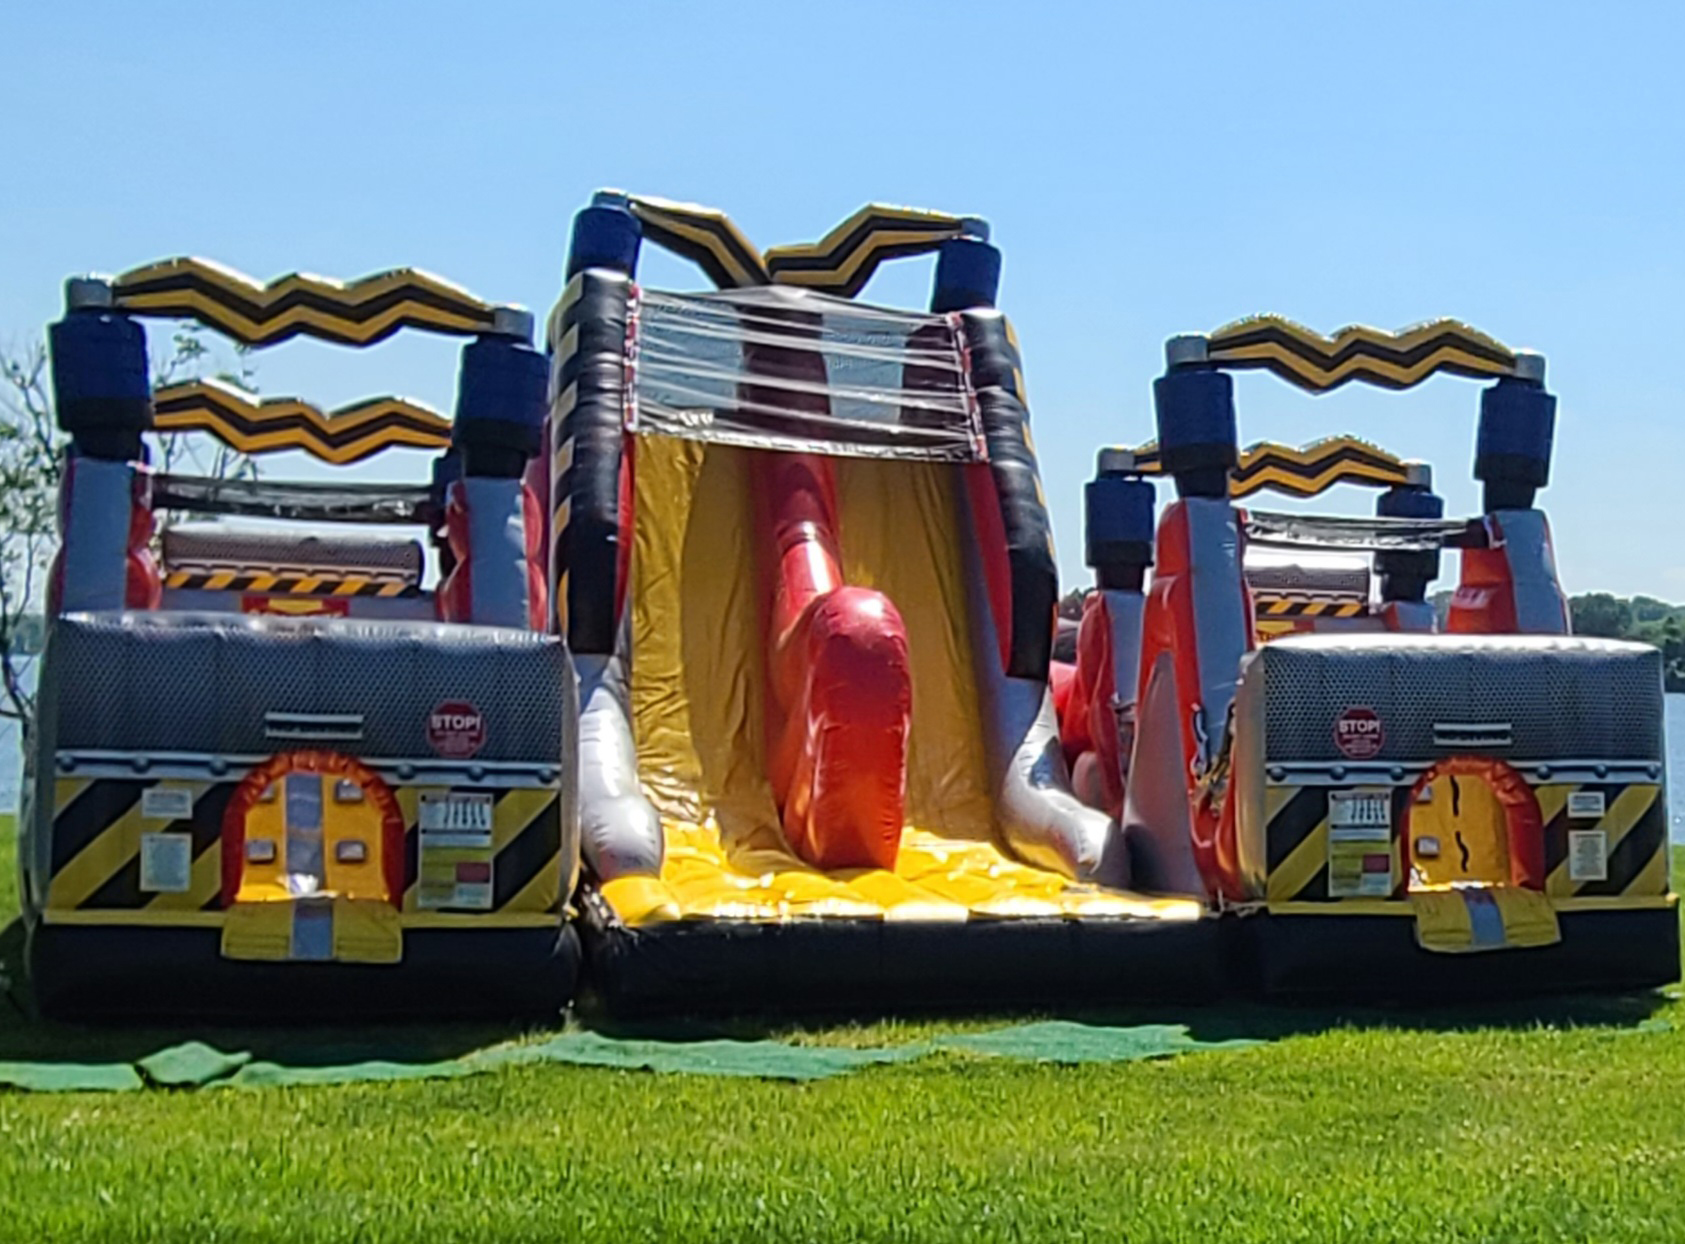 High Voltage obstacle course rental